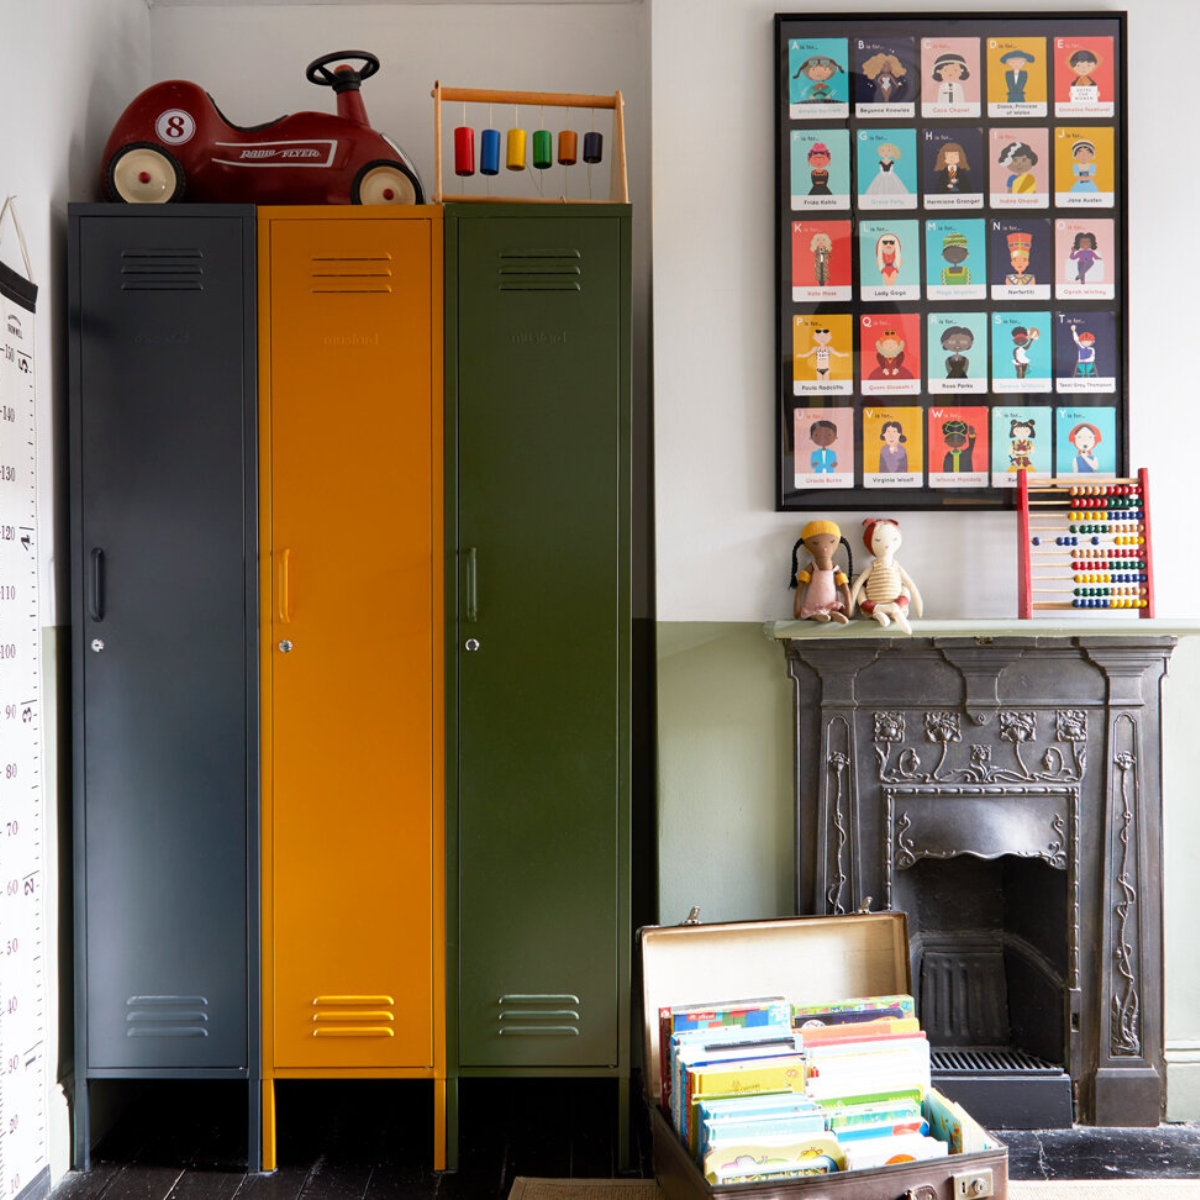 In a retro-inspired room, three Skinnys in Slate, Mustard and Olive sit flush into a nook next to an ornate Victorian fireplace. There is a vintage red metal toy car on top, and an open suitcase full of colourful books on the floor.